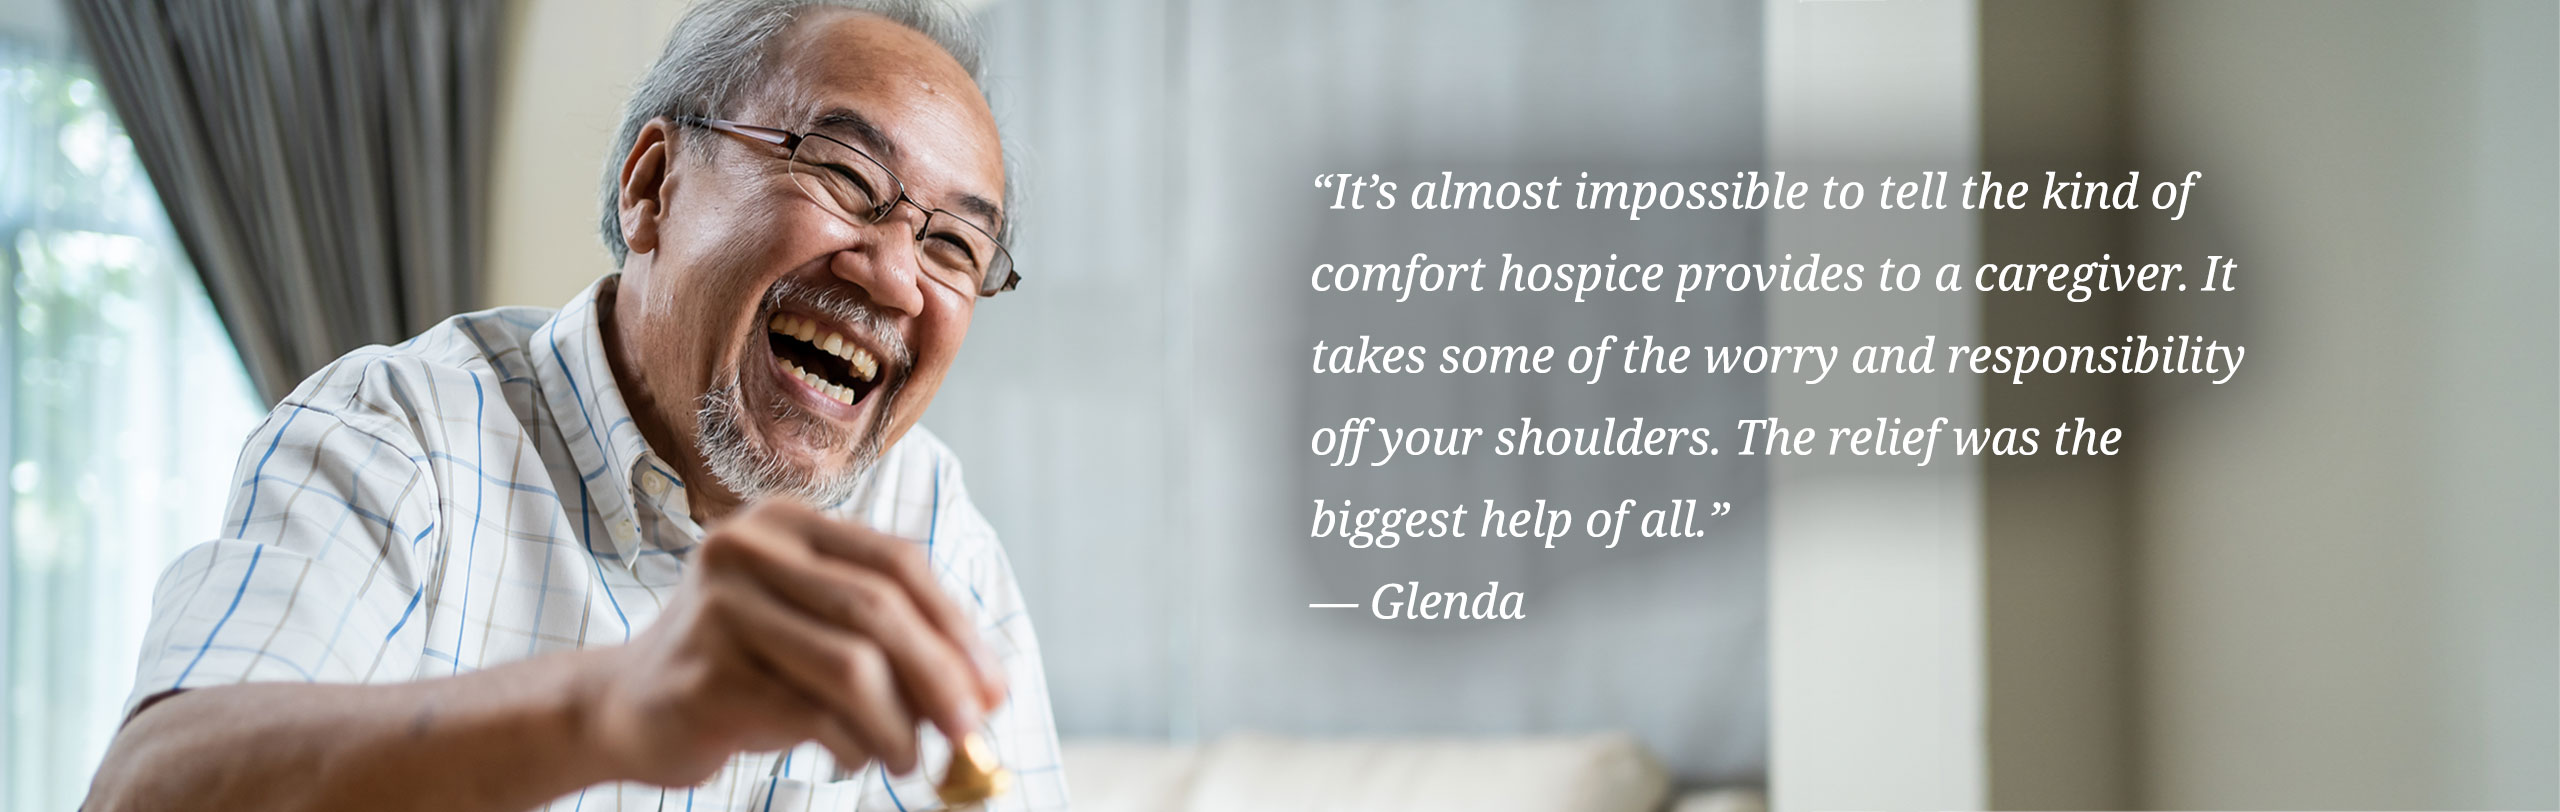 It’s almost impossible to tell the kind of comfort hospice provides to a caregiver. It takes some of the worry and responsibility off your shoulders. The relief was the biggest help of all.